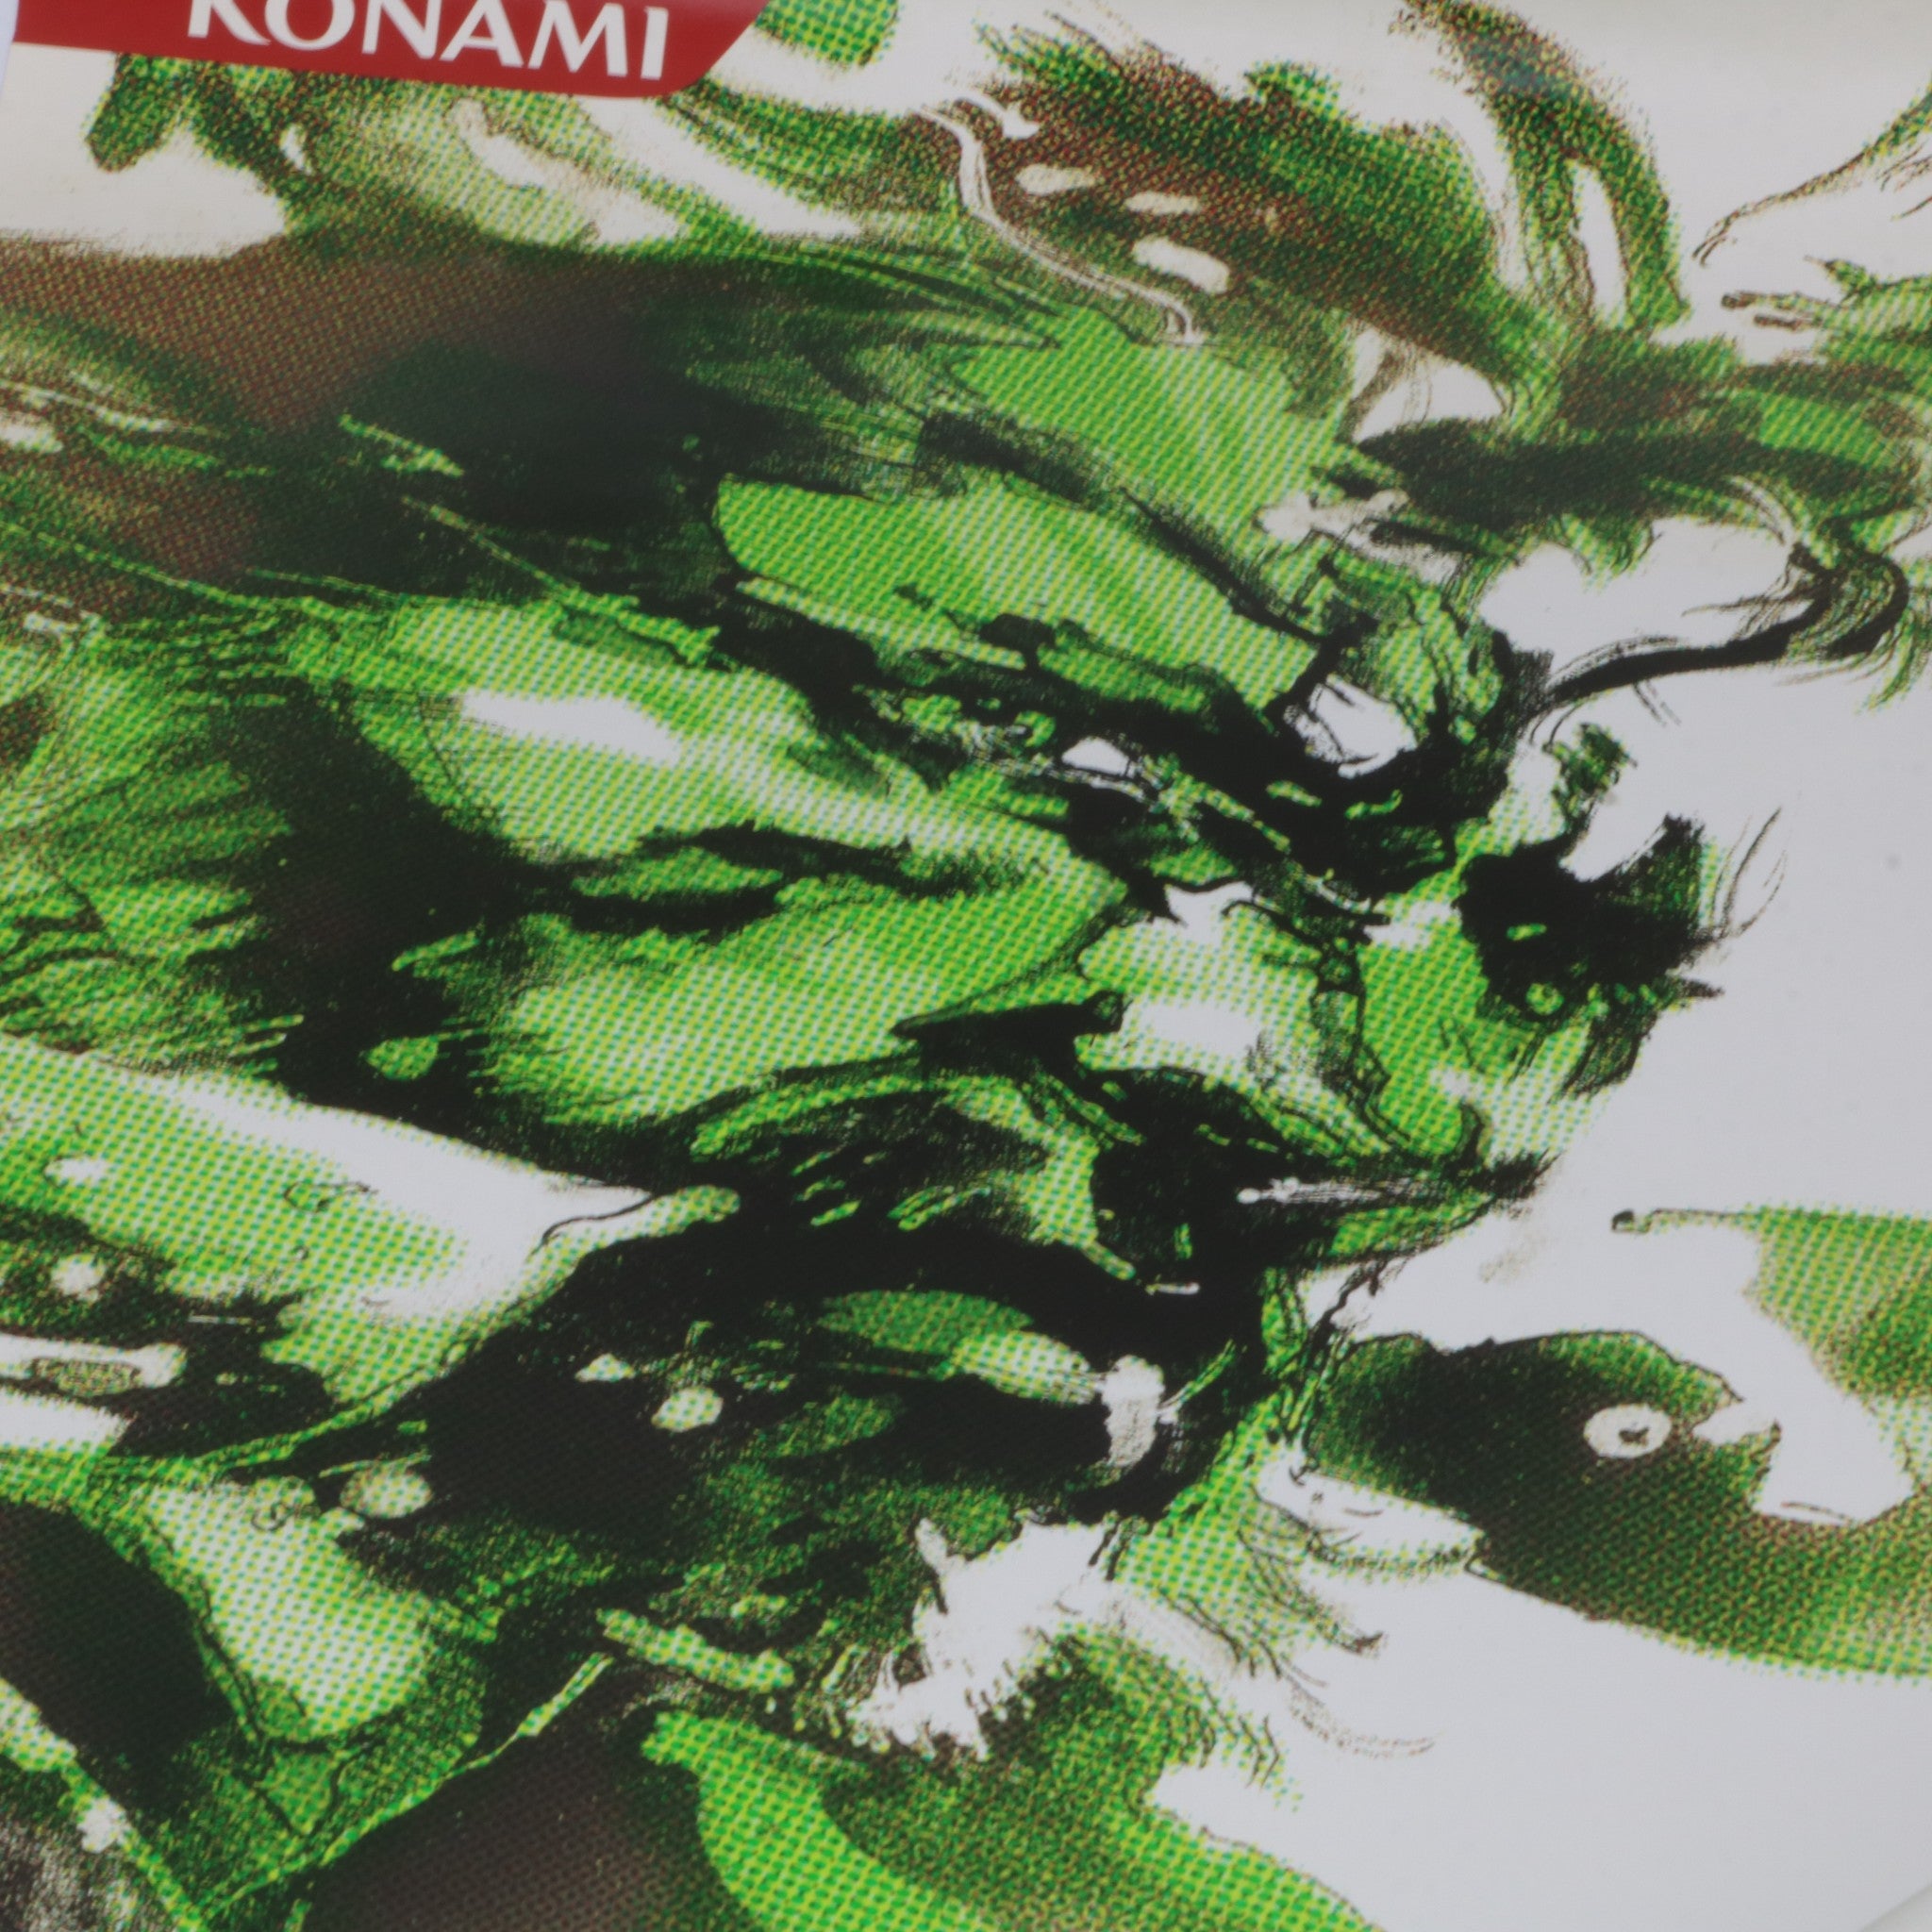 Metal Gear Solid 3 Snake Eater Original (LARGE) Japanese Poster | The First Bite